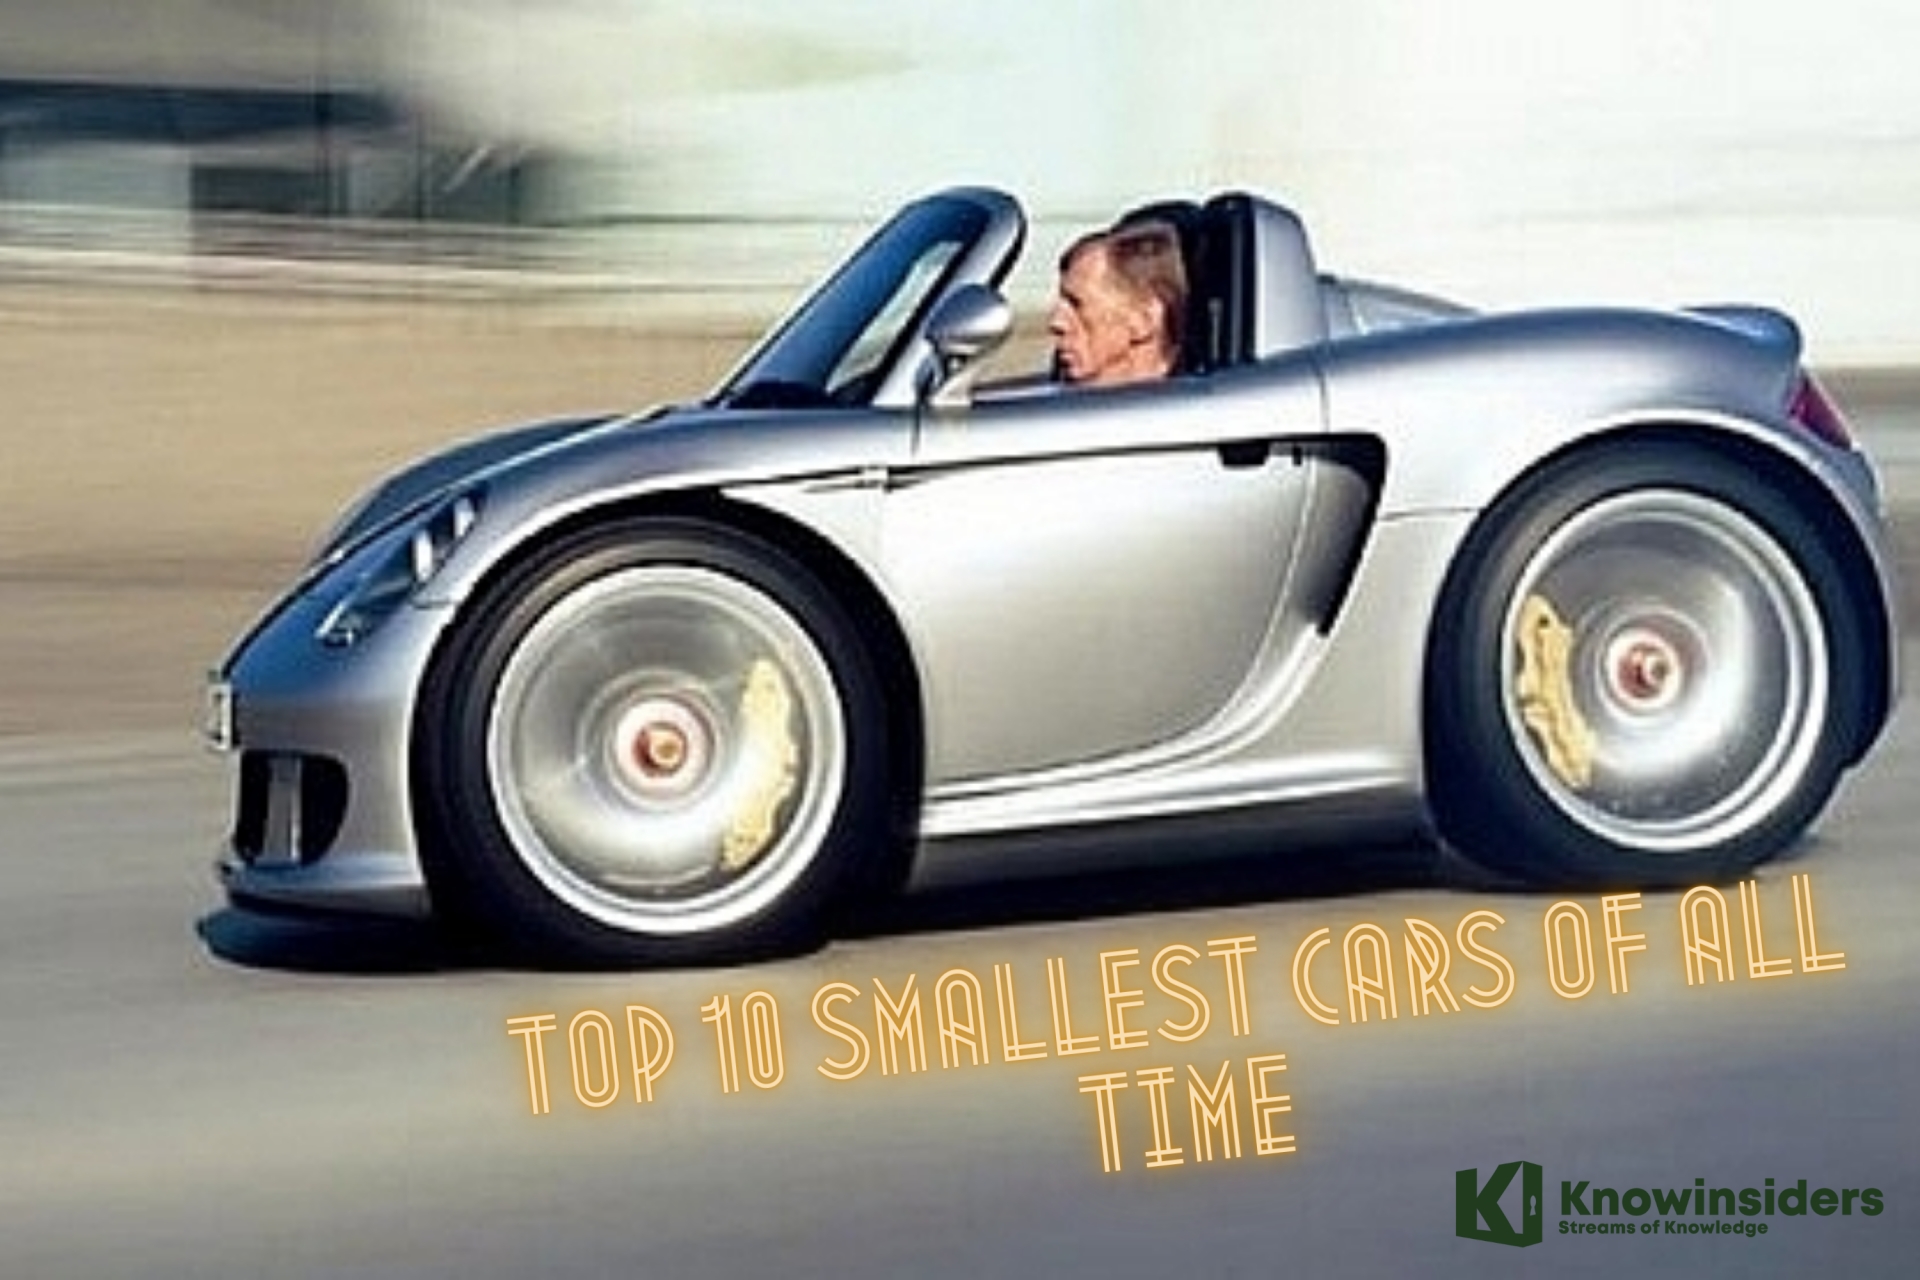 Top 10 Smallest Cars of All Time